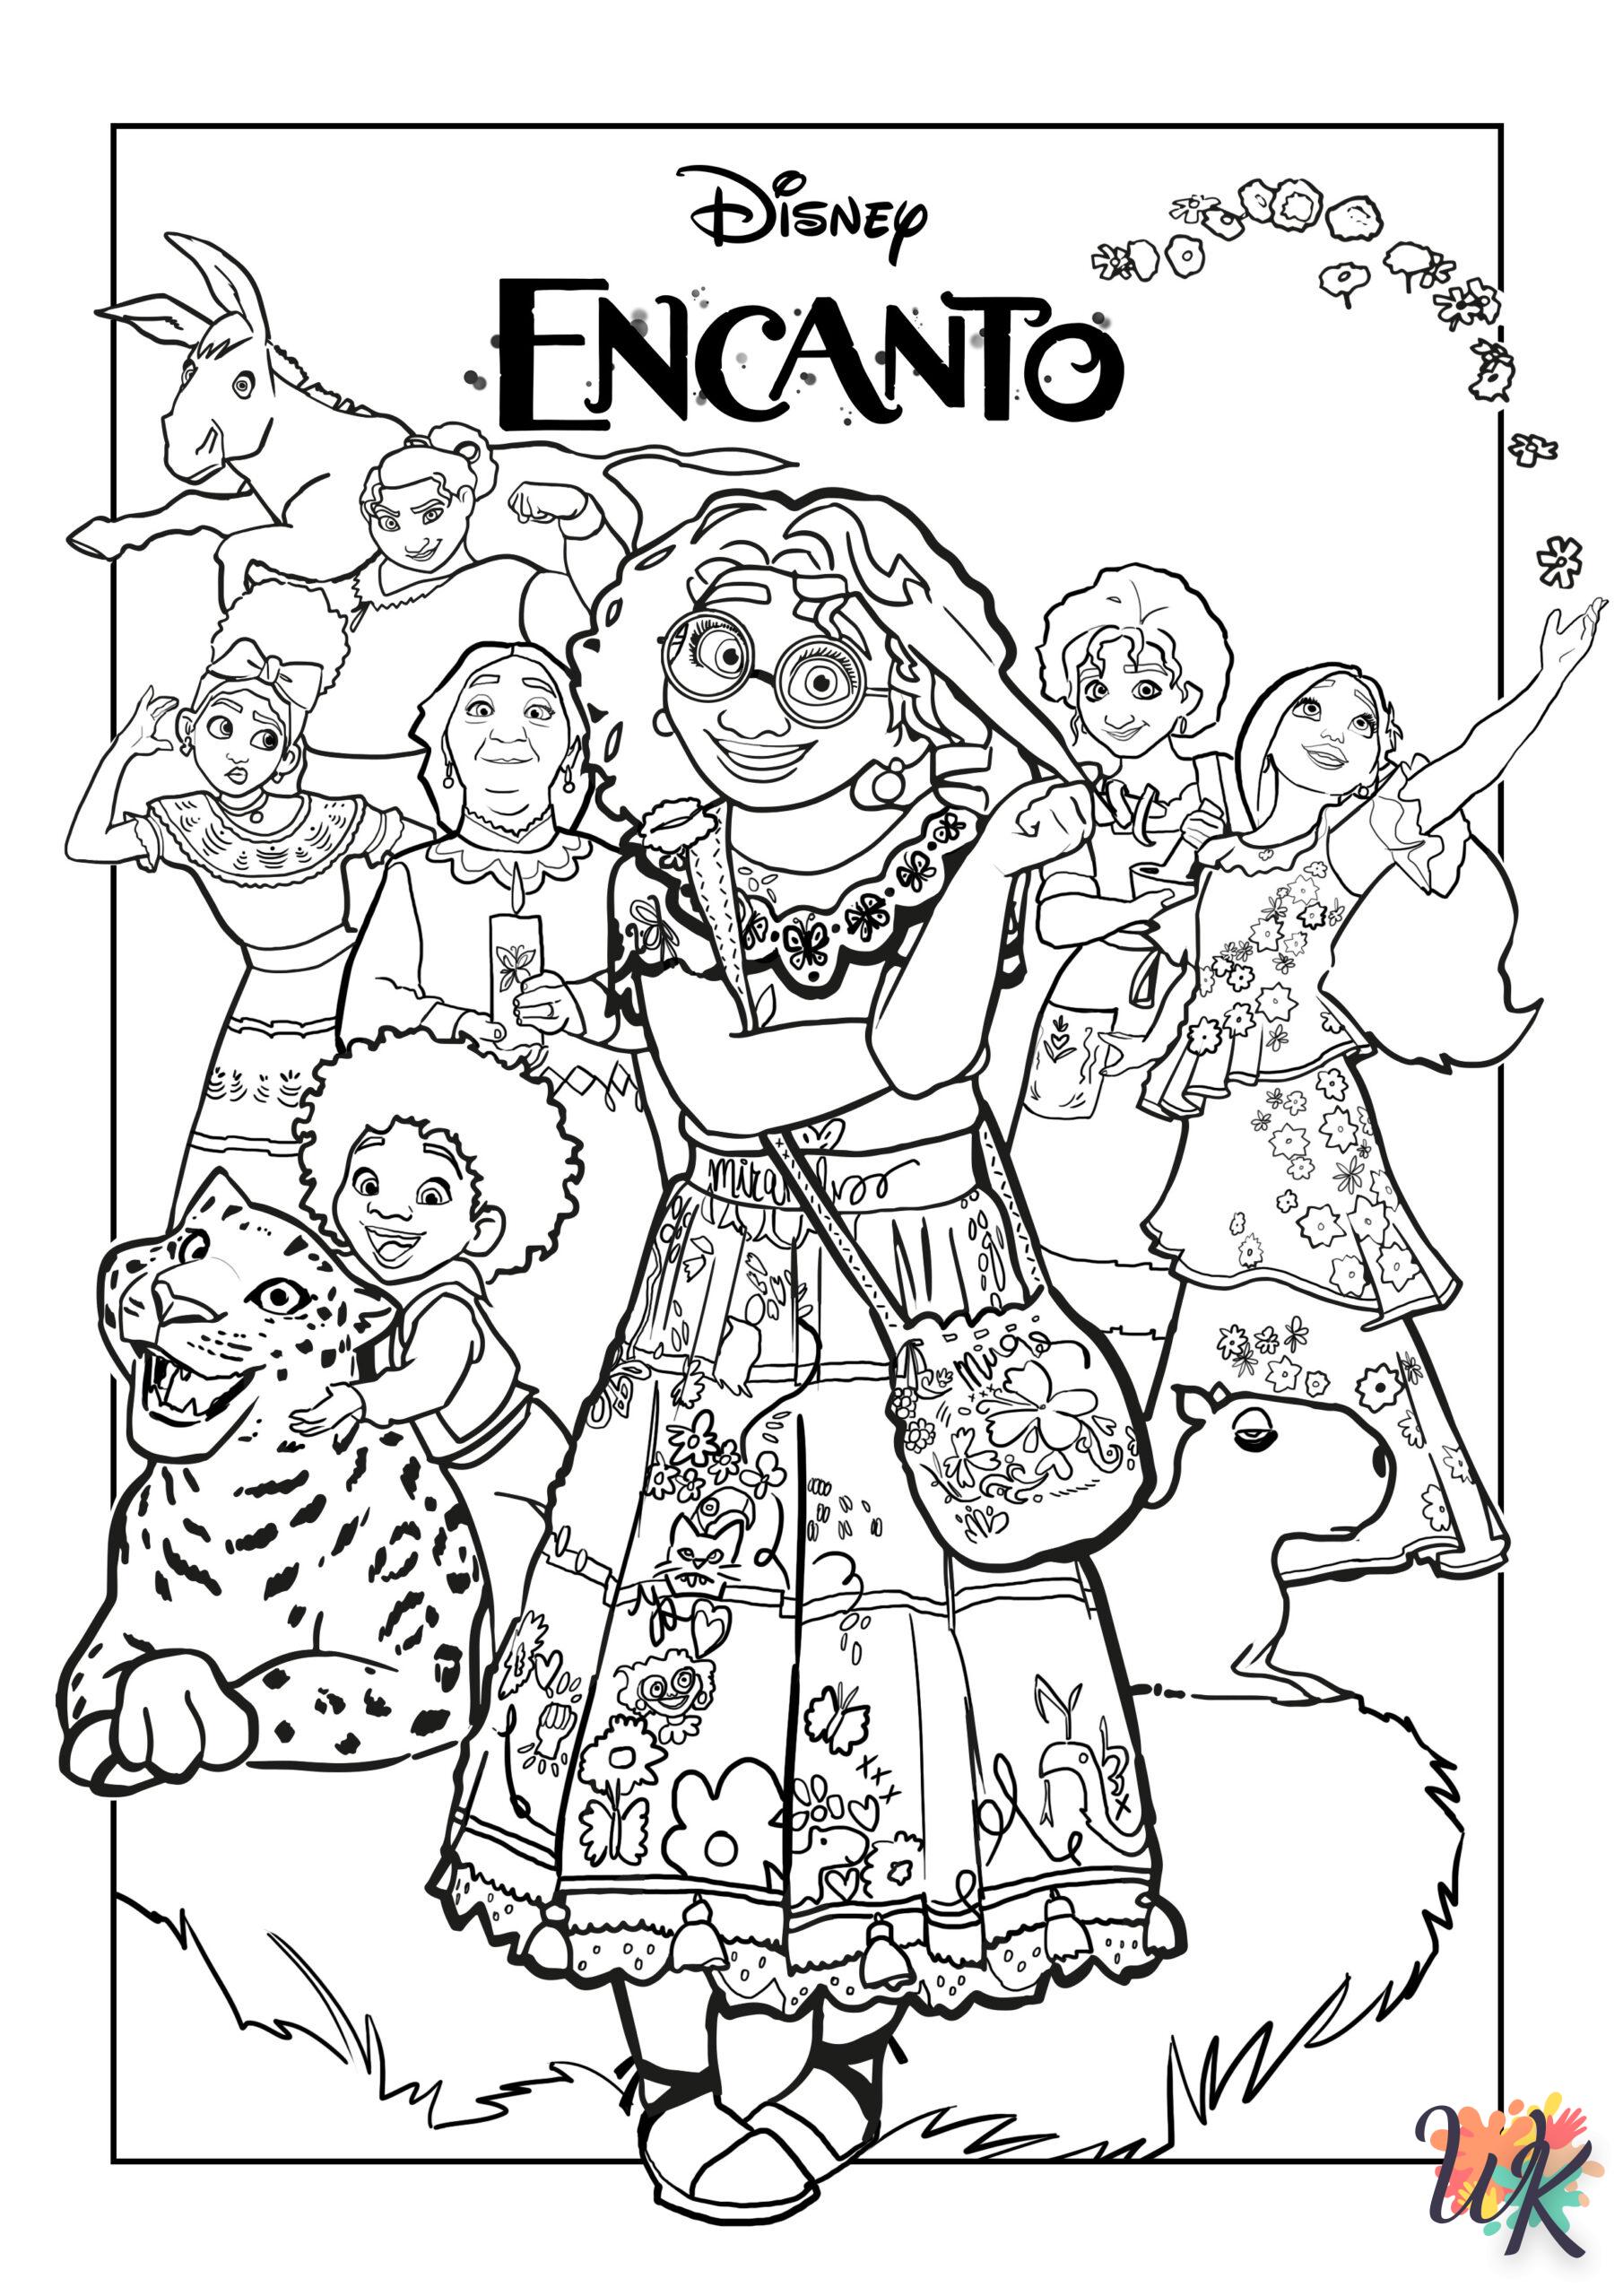 Encanto free coloring pages